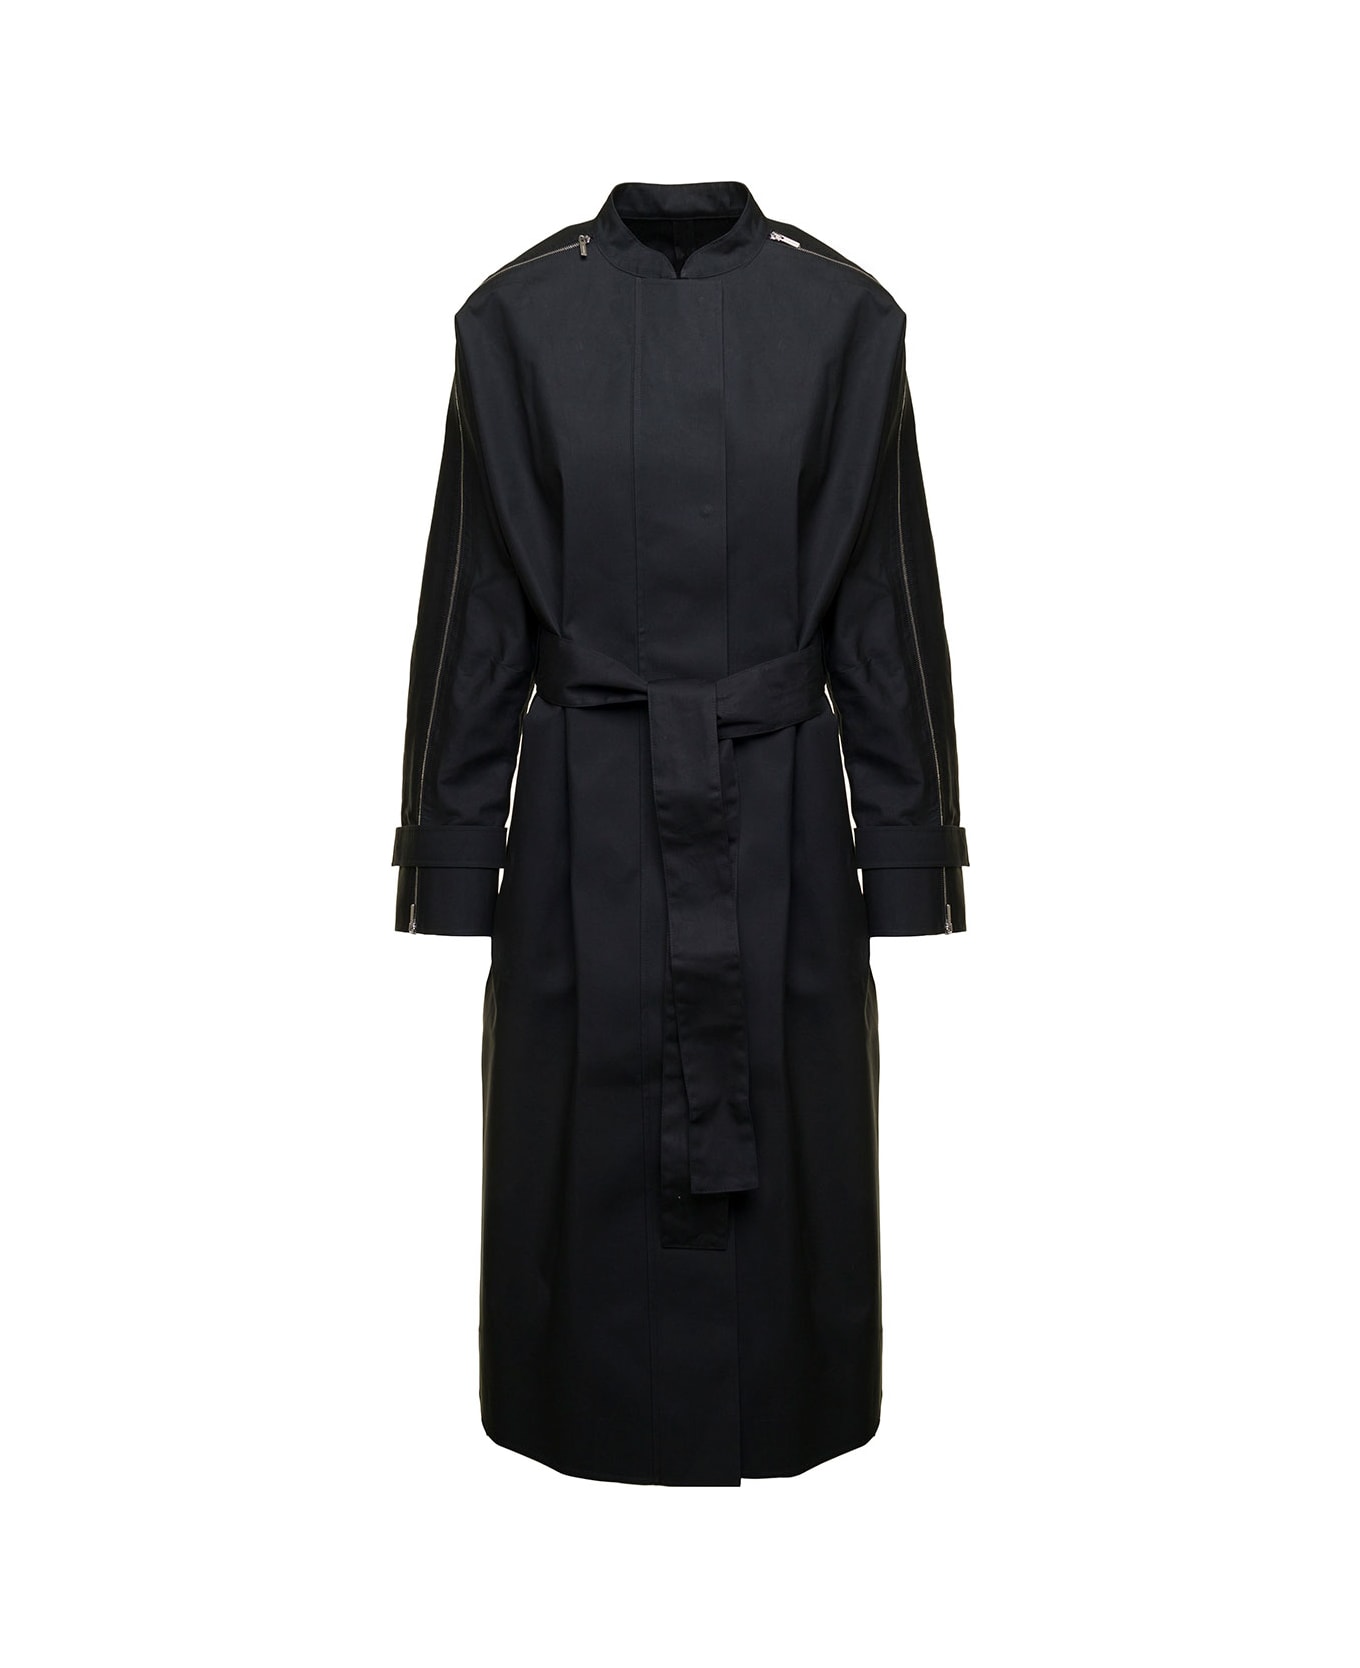 Ferragamo Long Blue Trench Coat With Matching Belt And Zip In Cotton Blend Woman - Black